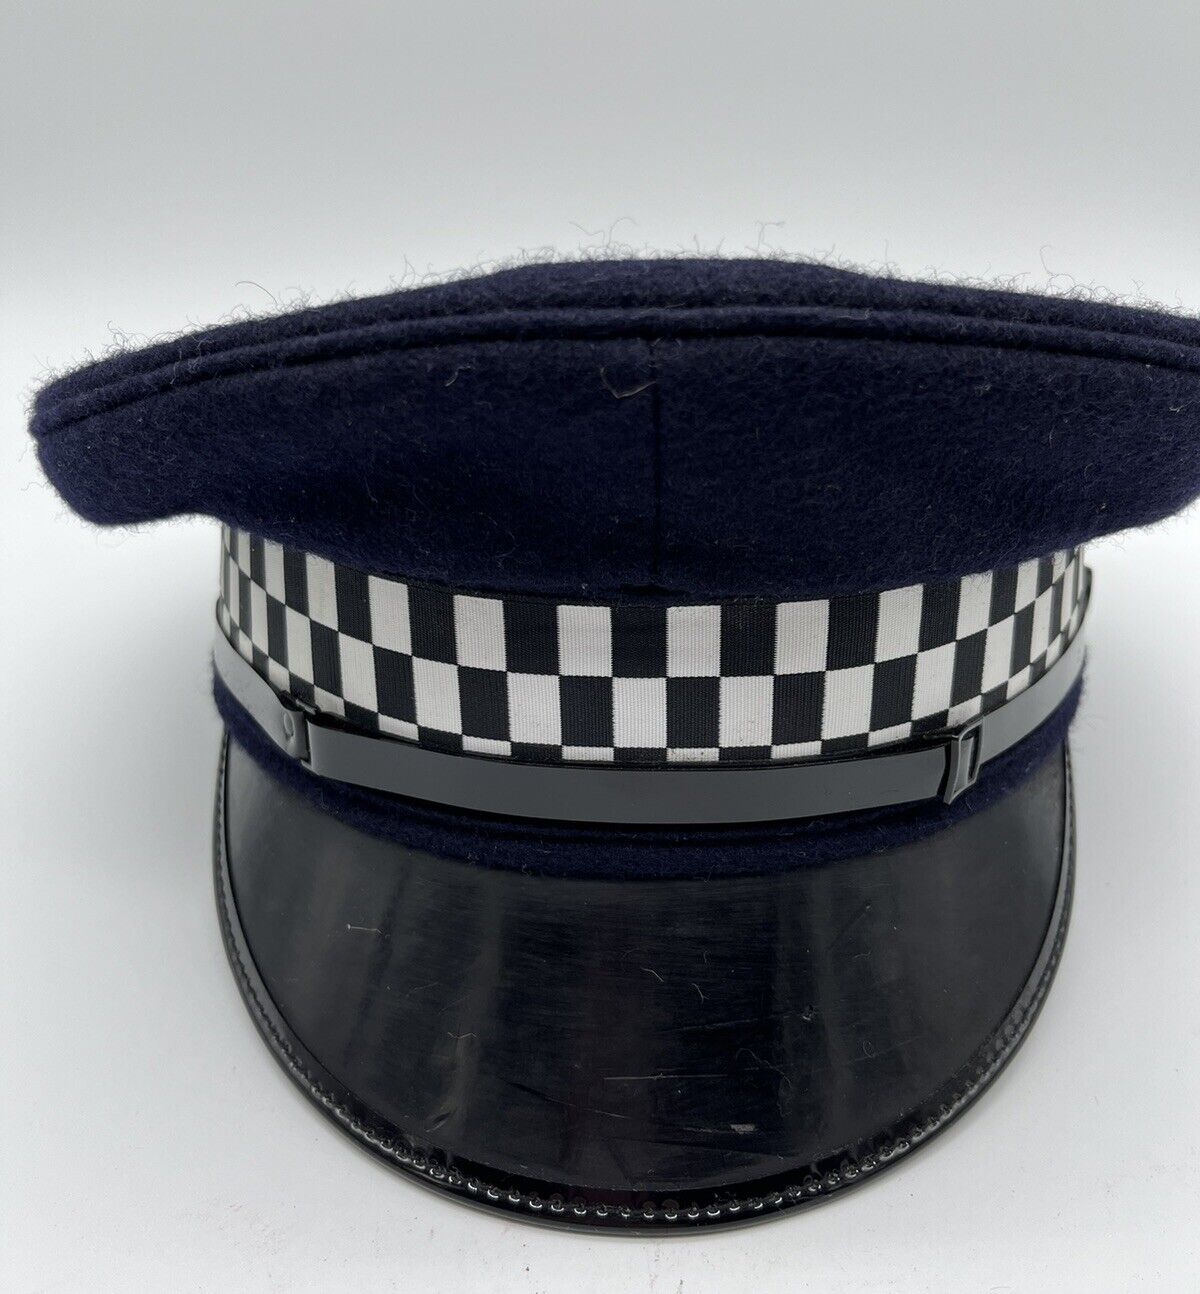 English Police Cap From England